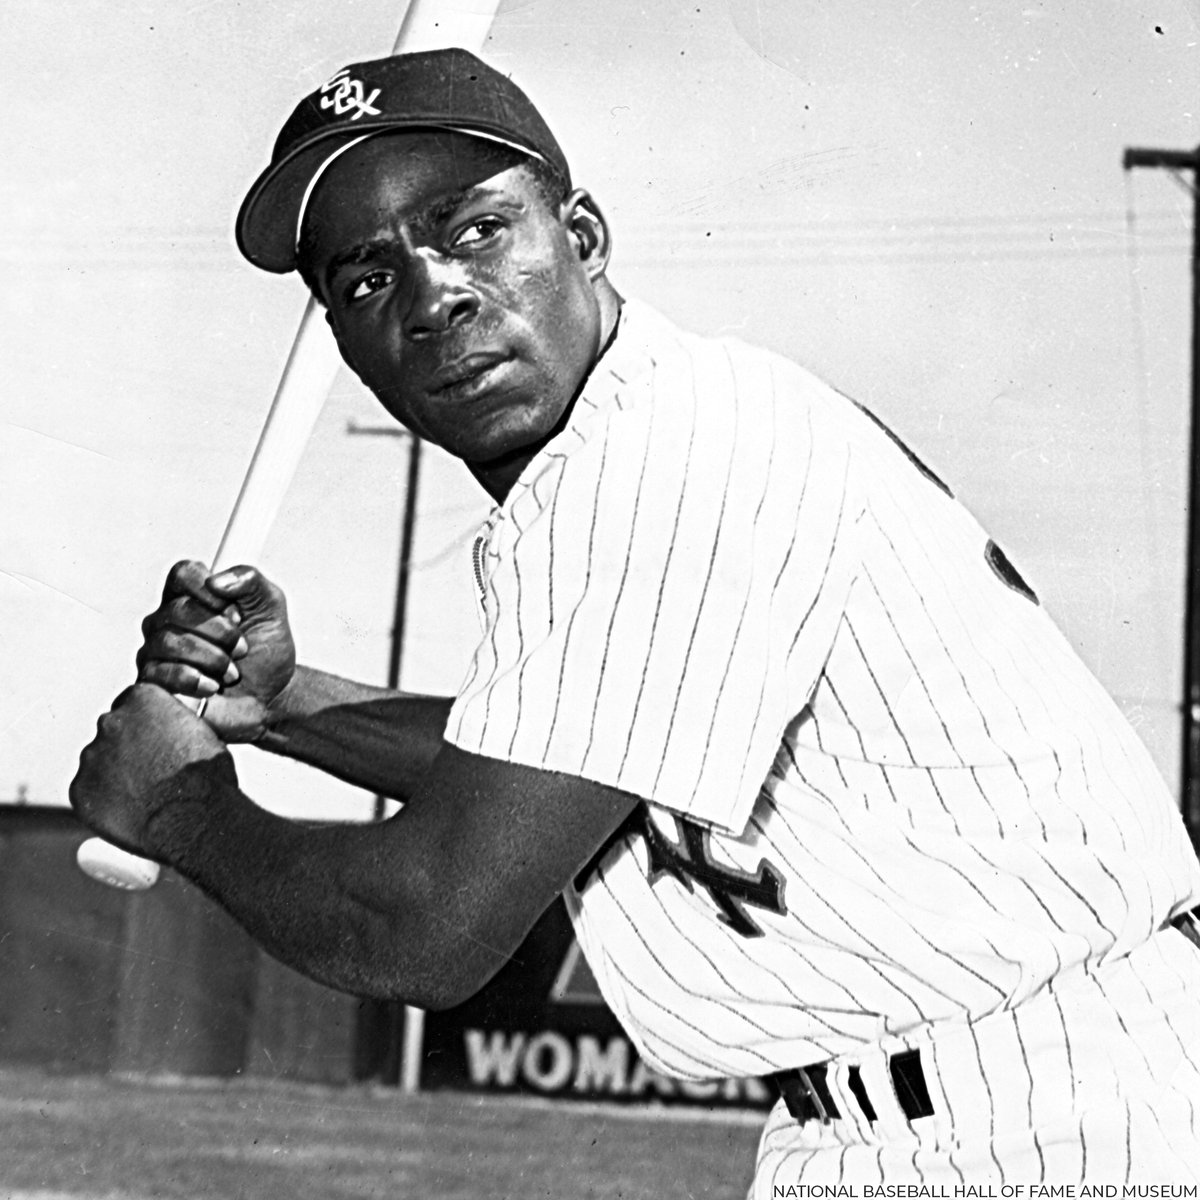 When the @whitesox acquired Minnie Miñoso via trade #OTD in 1951, the Cuban-born speedster embraced the opportunity. He was soon named to his first All-Star team and blossomed into one of the AL’s top hitters. ow.ly/Zu7R50Rsktm